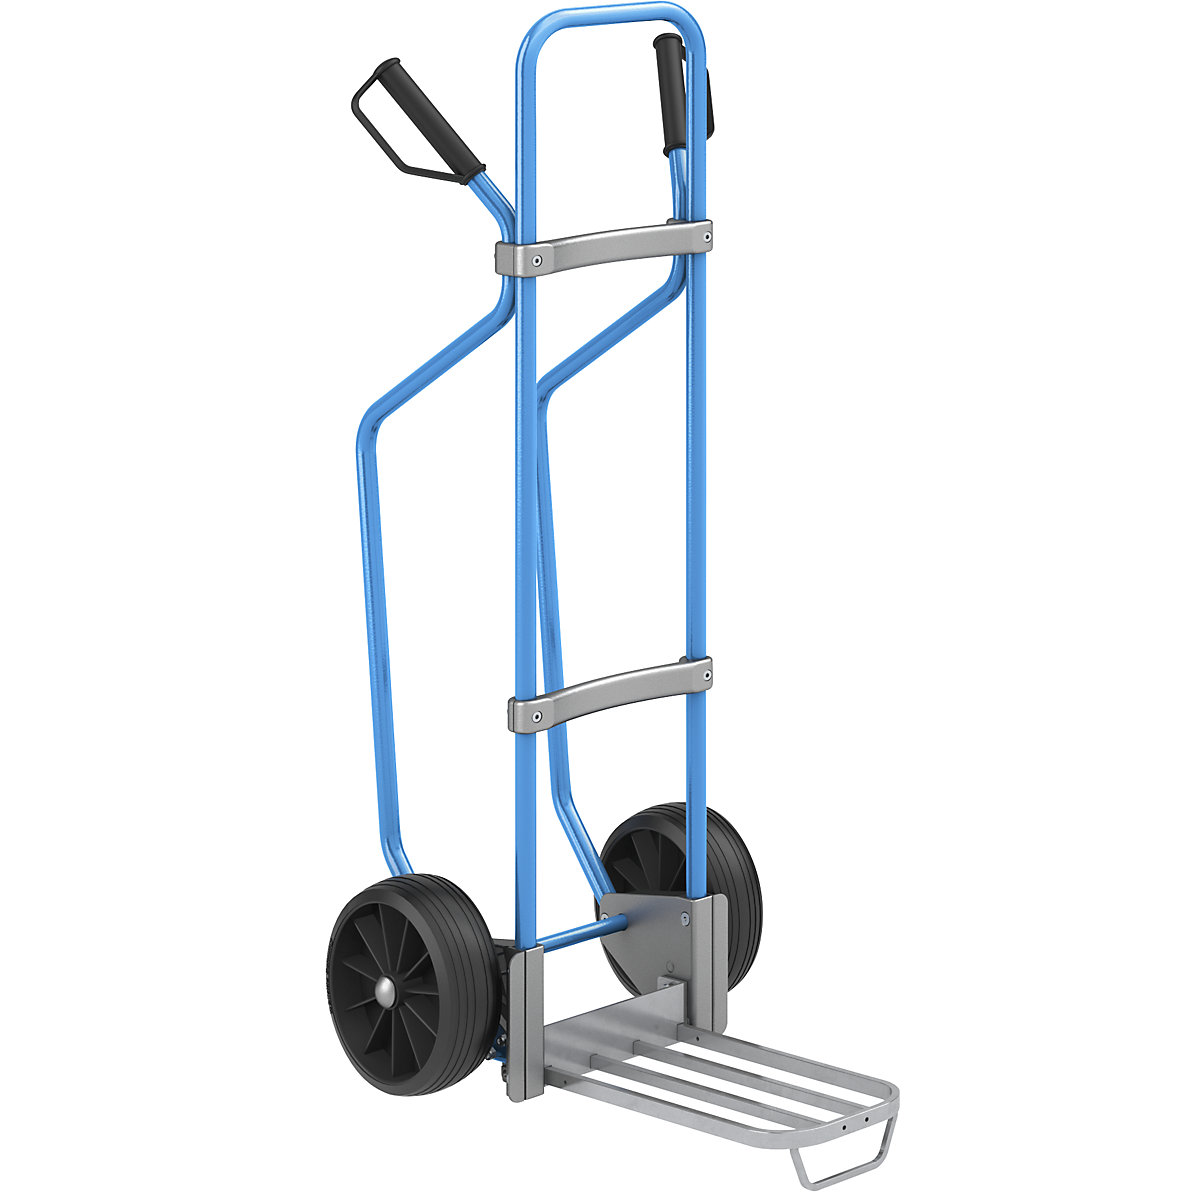 Sack truck with runners, blue – eurokraft pro, parcel footplate WxD 430 x 250 mm, zinc plated, with handle, solid rubber tyres, 2+ items-1